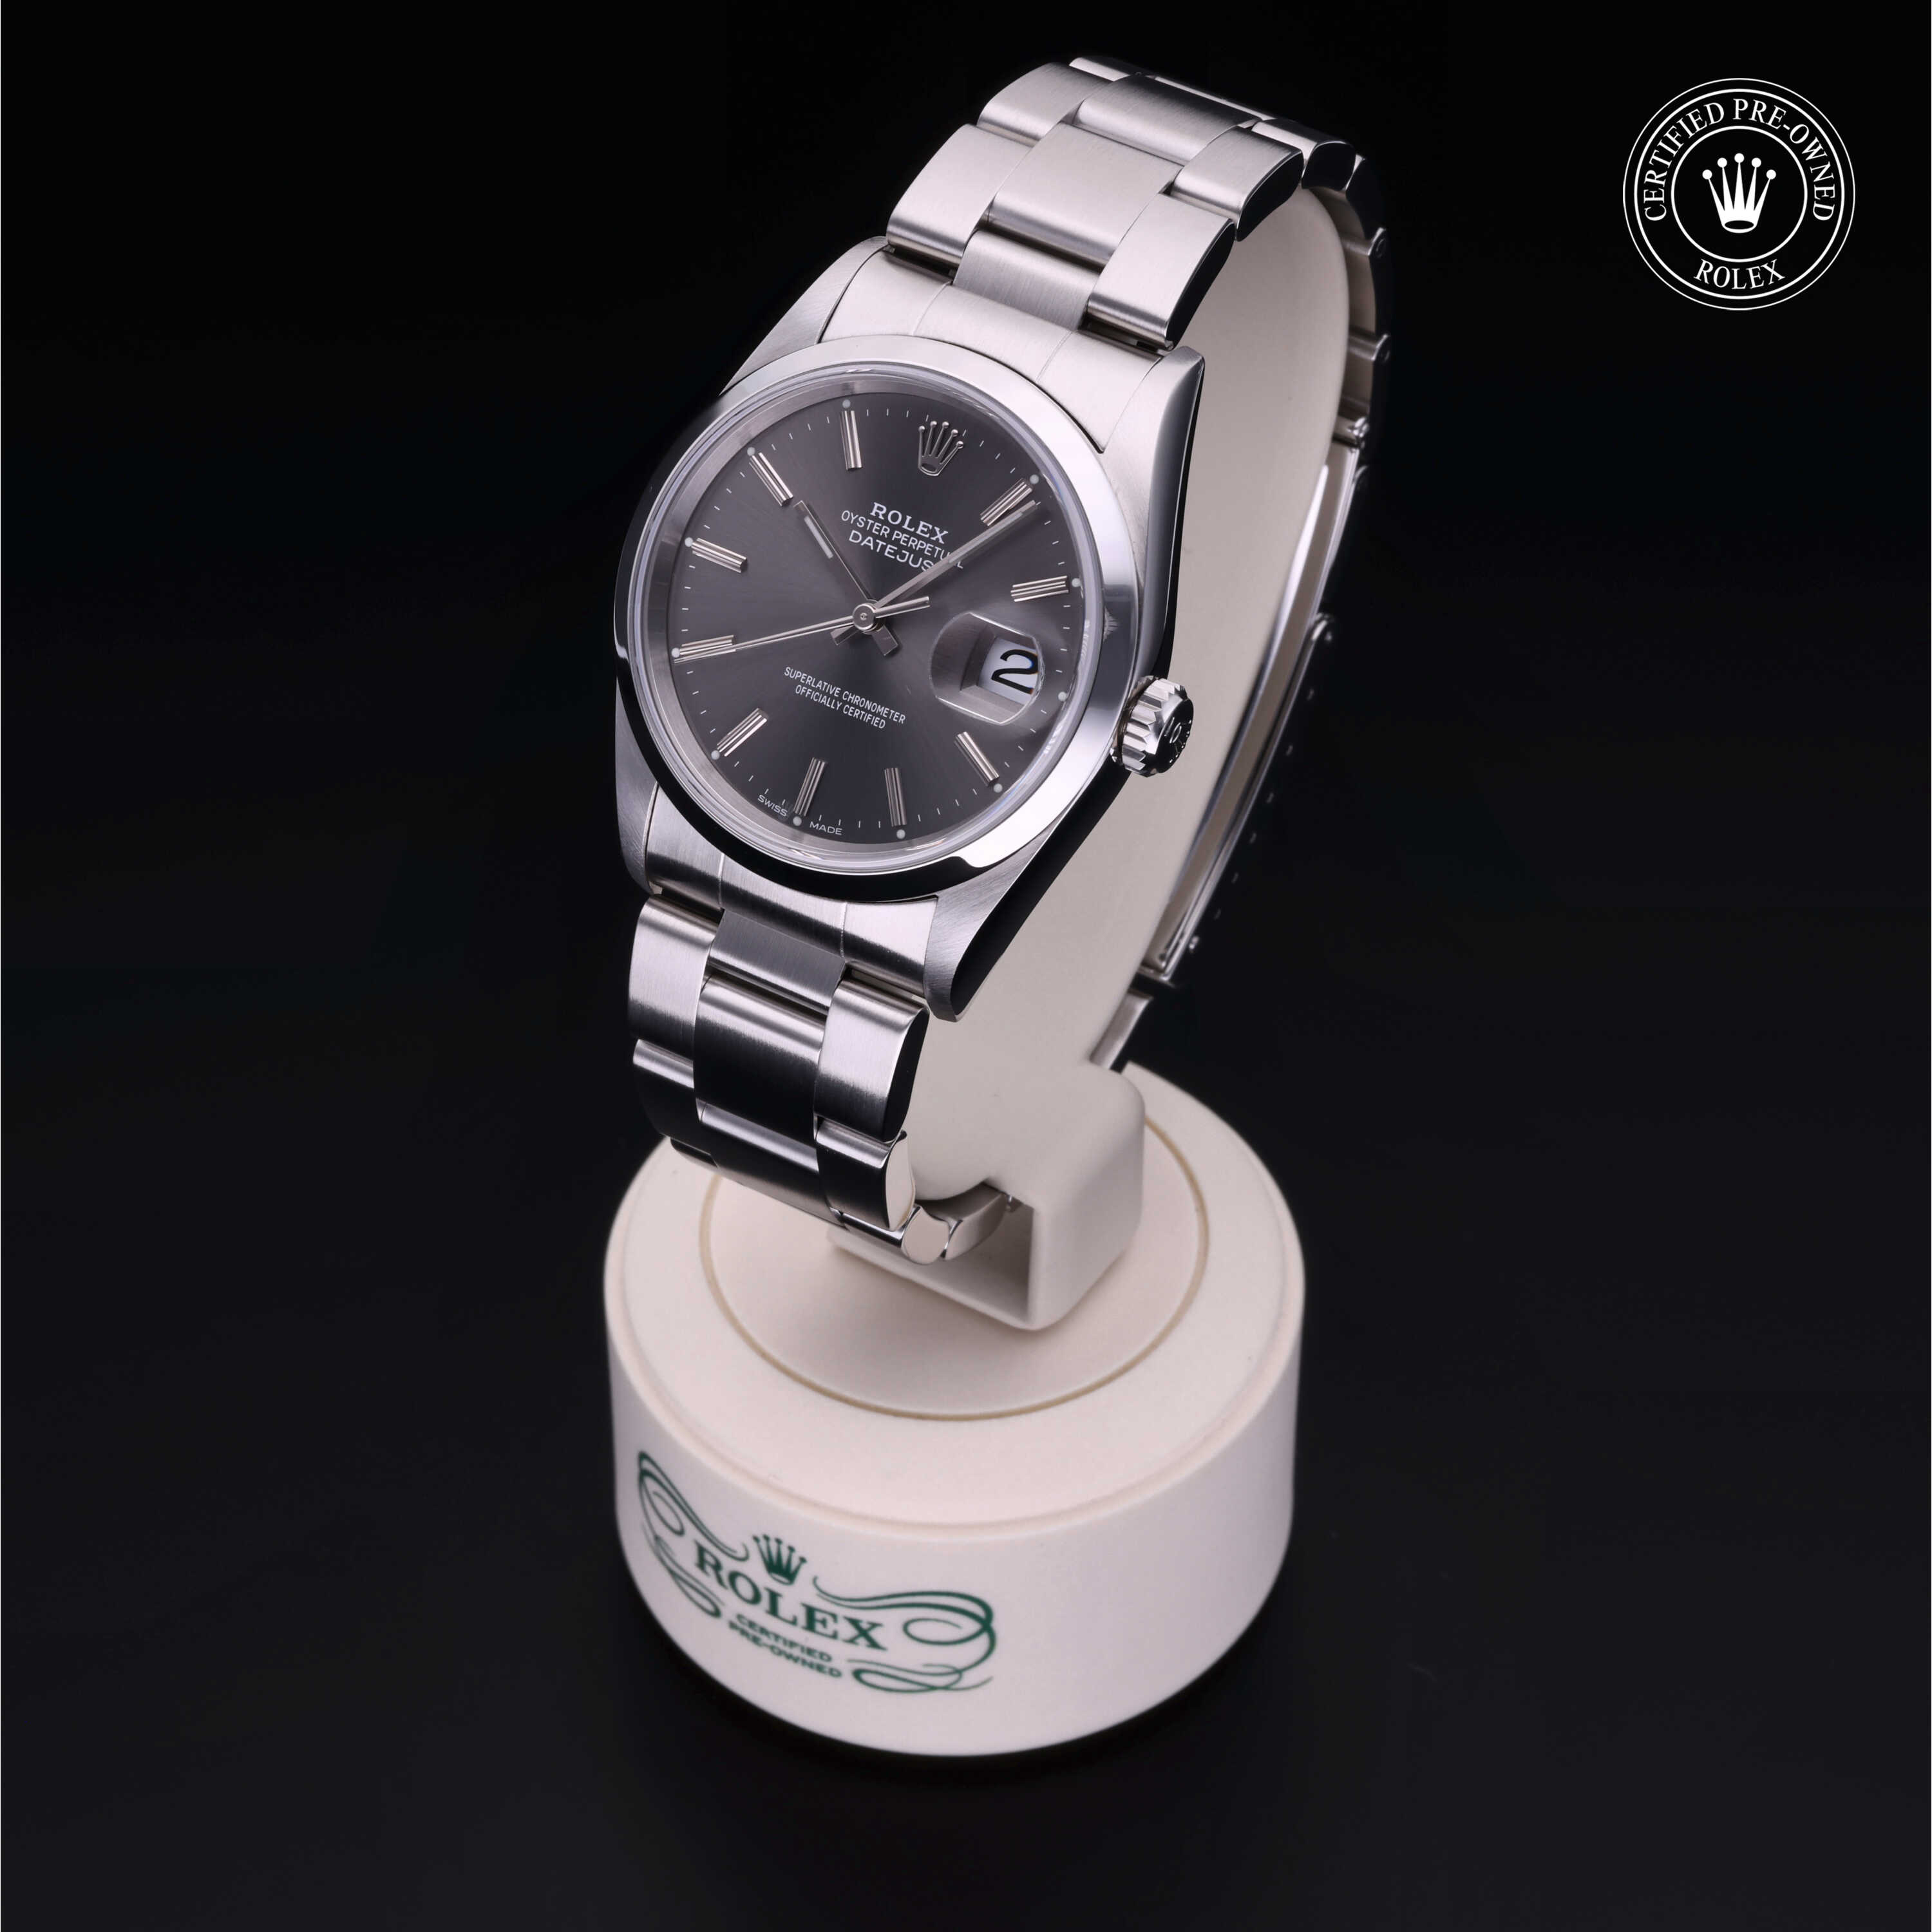 Rolex Datejust in Oystersteel M16200-0041 at Wilson & Son Jewelers